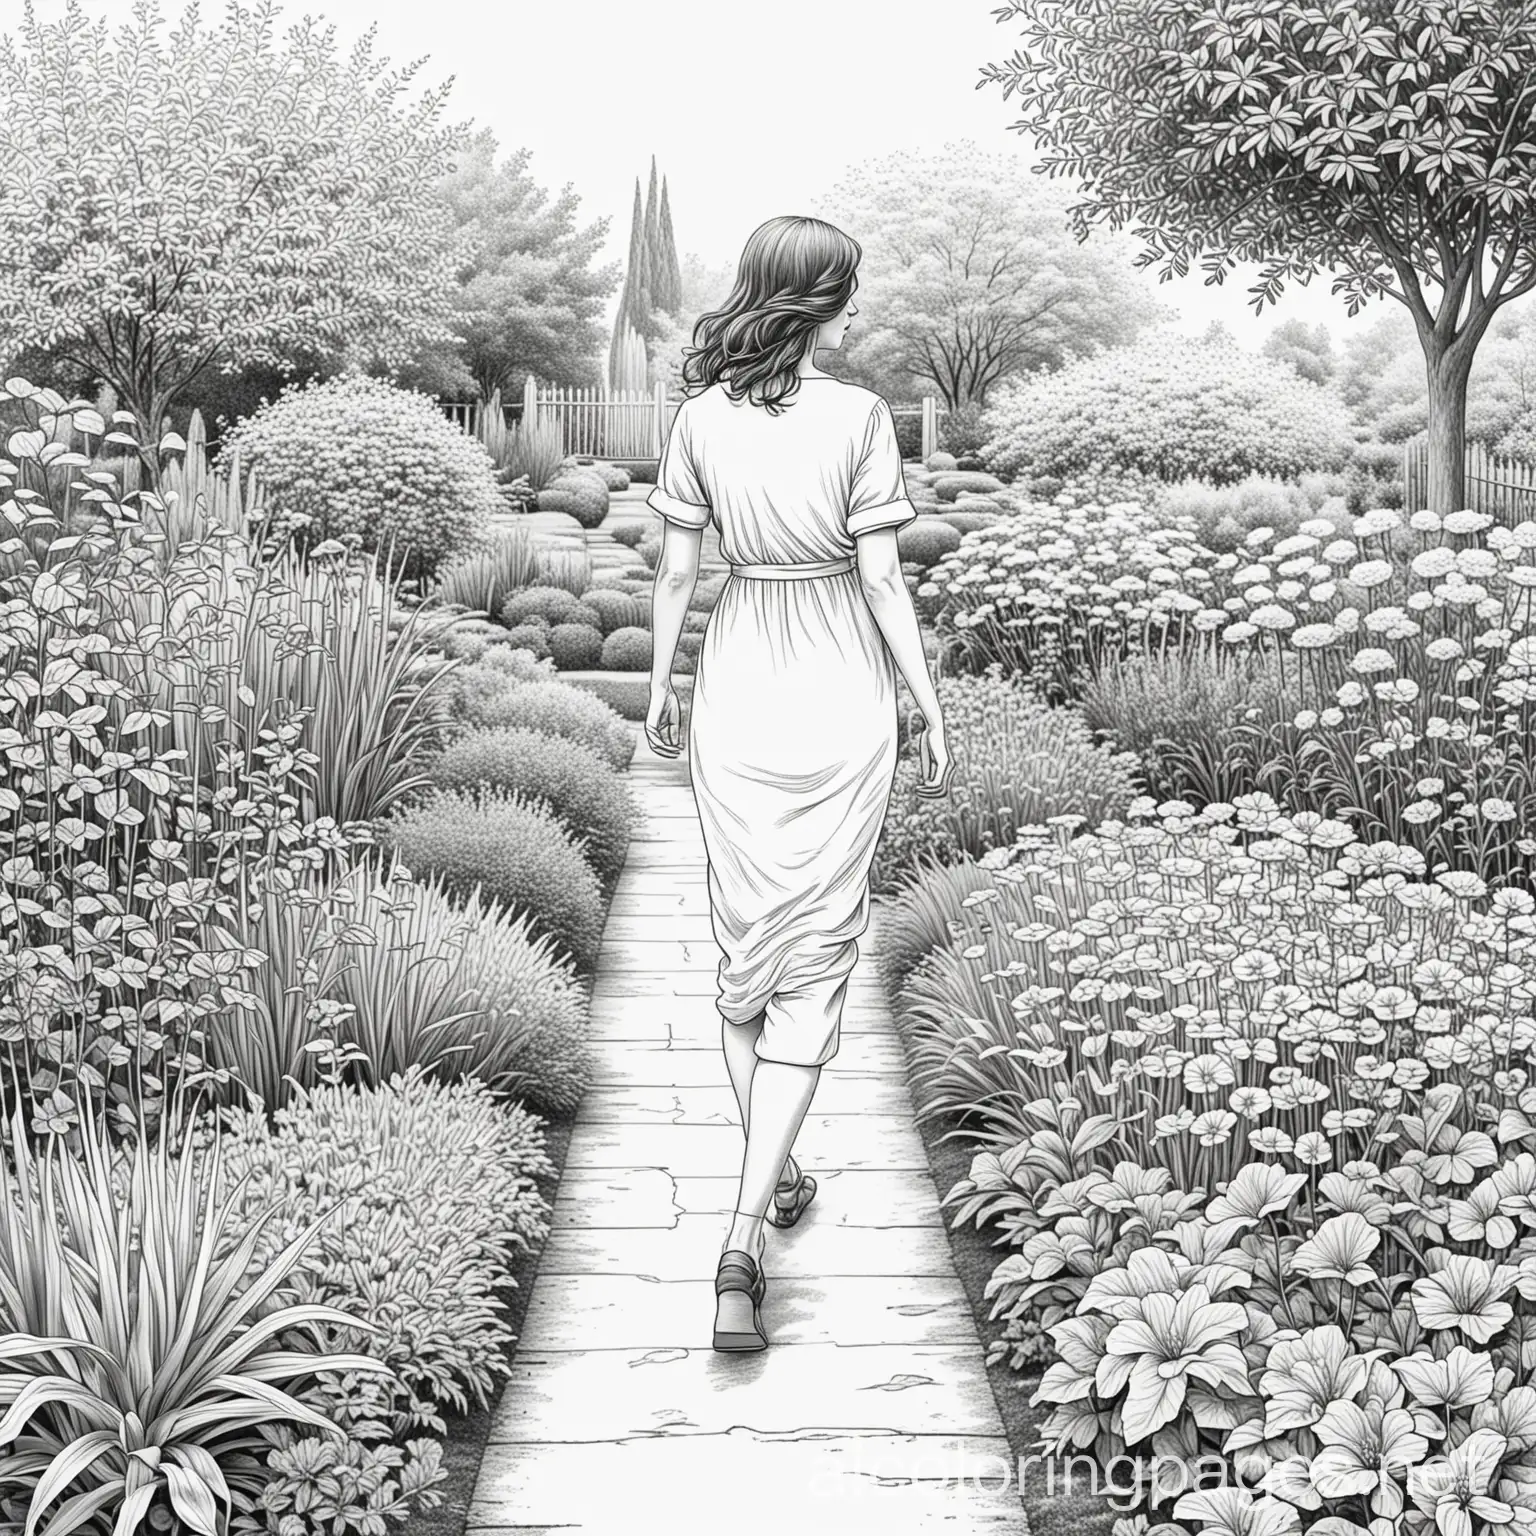 a woman walking down a garden, Coloring Page, black and white, line art, white background, Simplicity, Ample White Space. The background of the coloring page is plain white to make it easy for young children to color within the lines. The outlines of all the subjects are easy to distinguish, making it simple for kids to color without too much difficulty